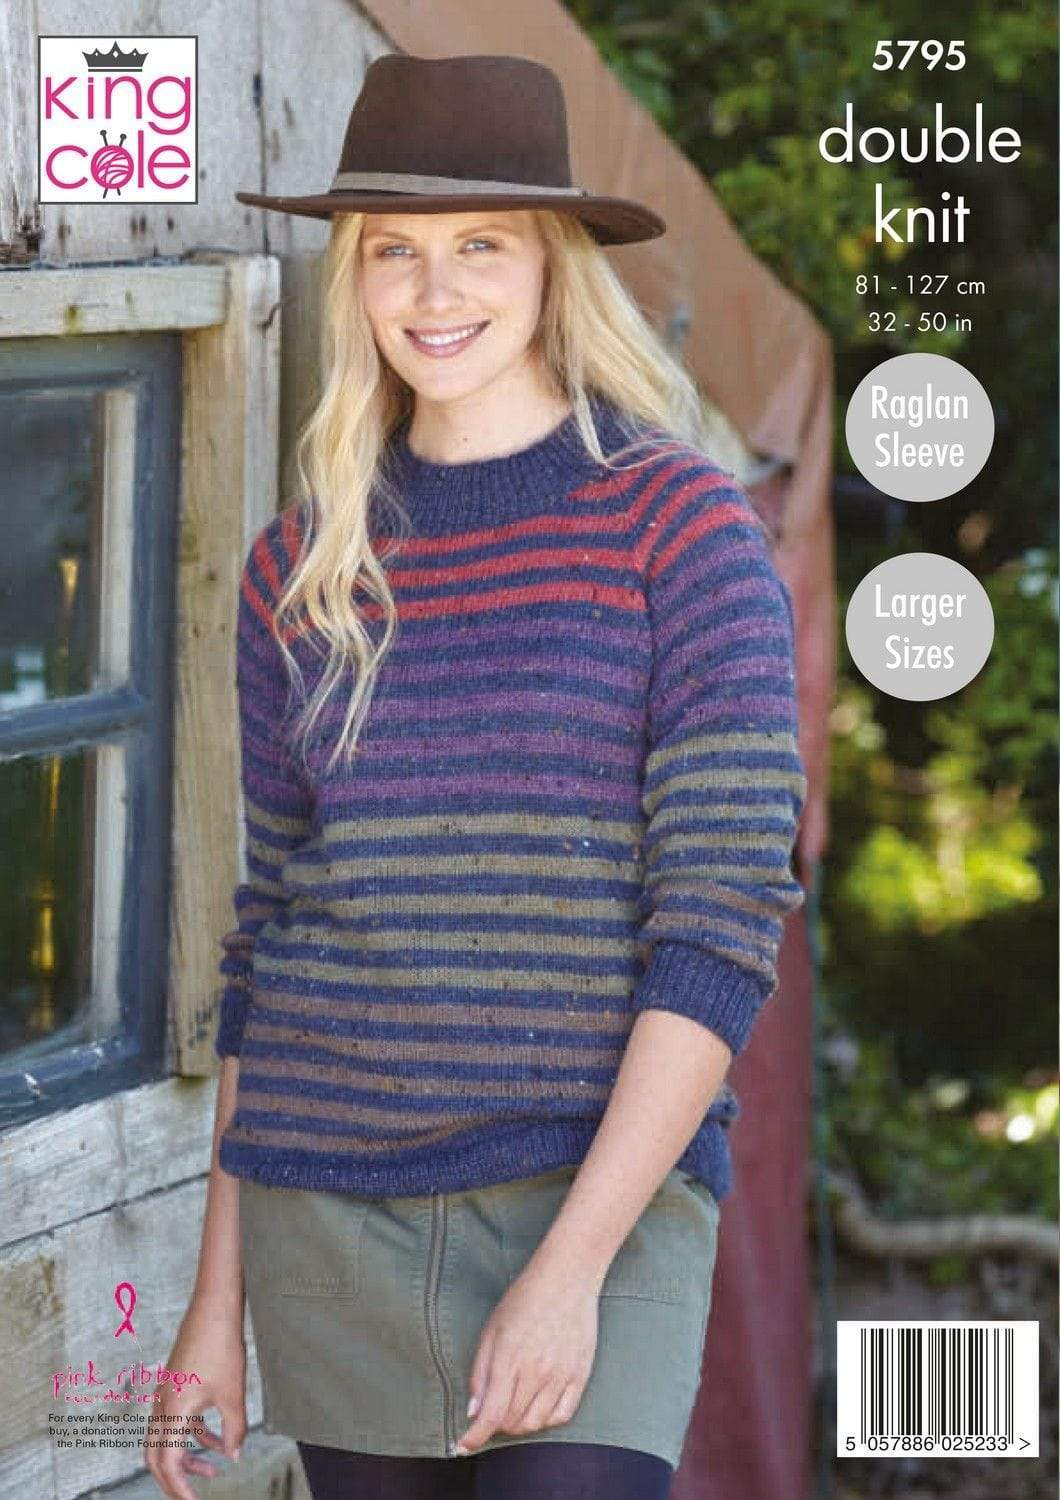 King Cole Patterns King Cole Homespun DK - Ladies Round and High Neck Sweaters (5795) 5057886025233